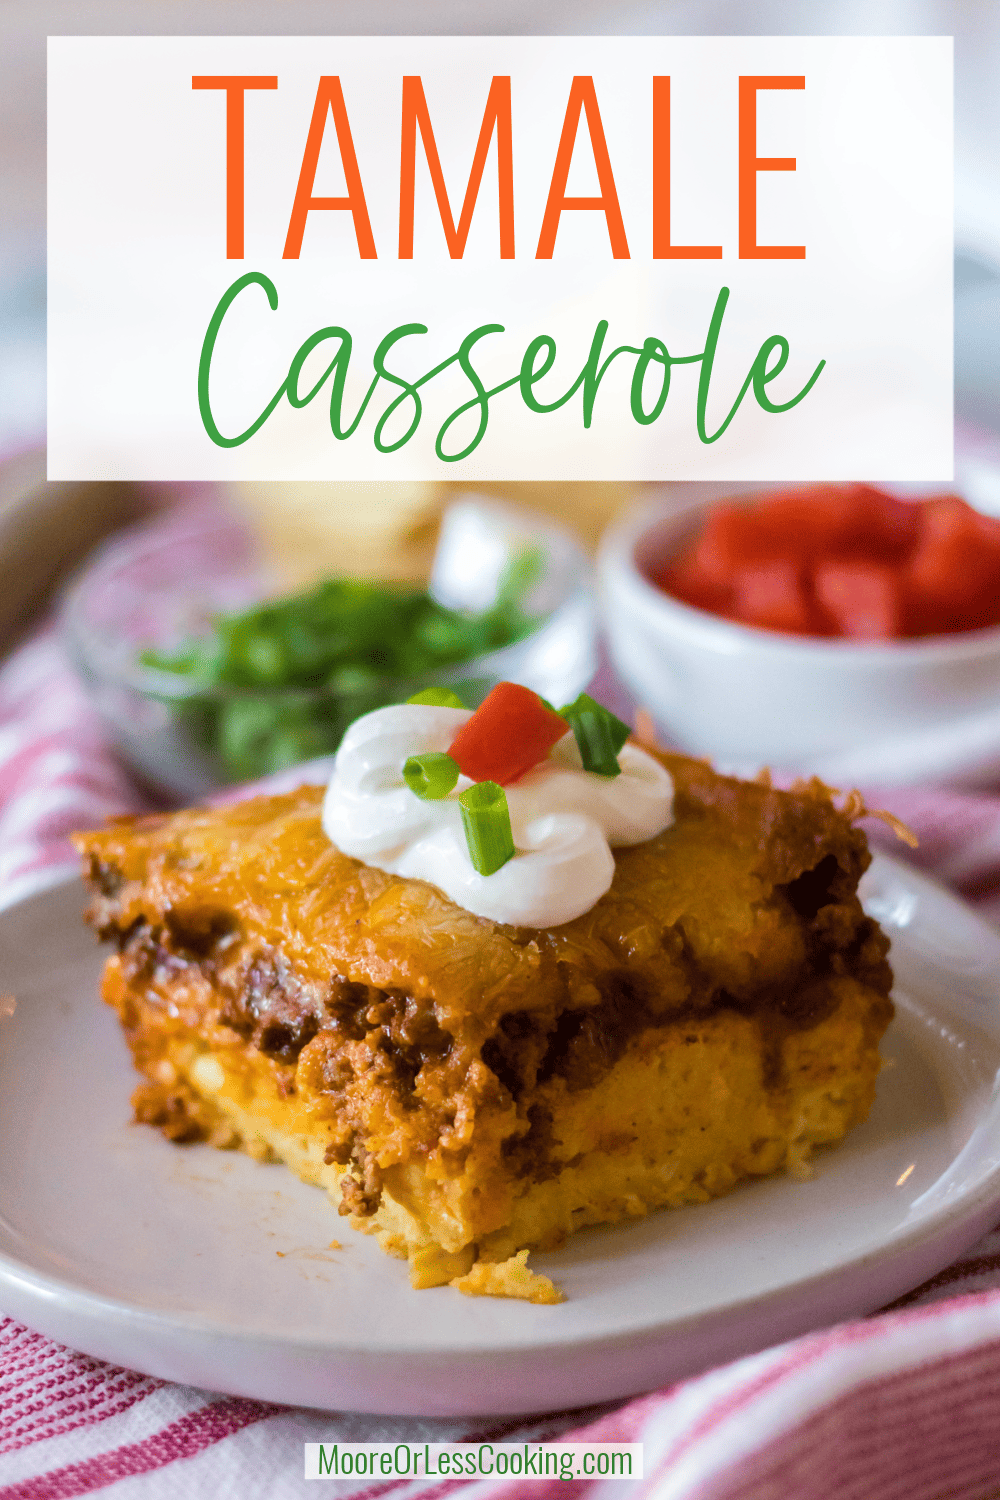 This Tamale Casserole uses simple pantry ingredients to bake up a Mexican-inspired meal that's always a family favorite. This recipe comes together easily for a weeknight meal that spices up a cornbread mix that's topped with a seasoned ground beef mixture and baked to savory and cheesy deliciousness. via @Mooreorlesscook